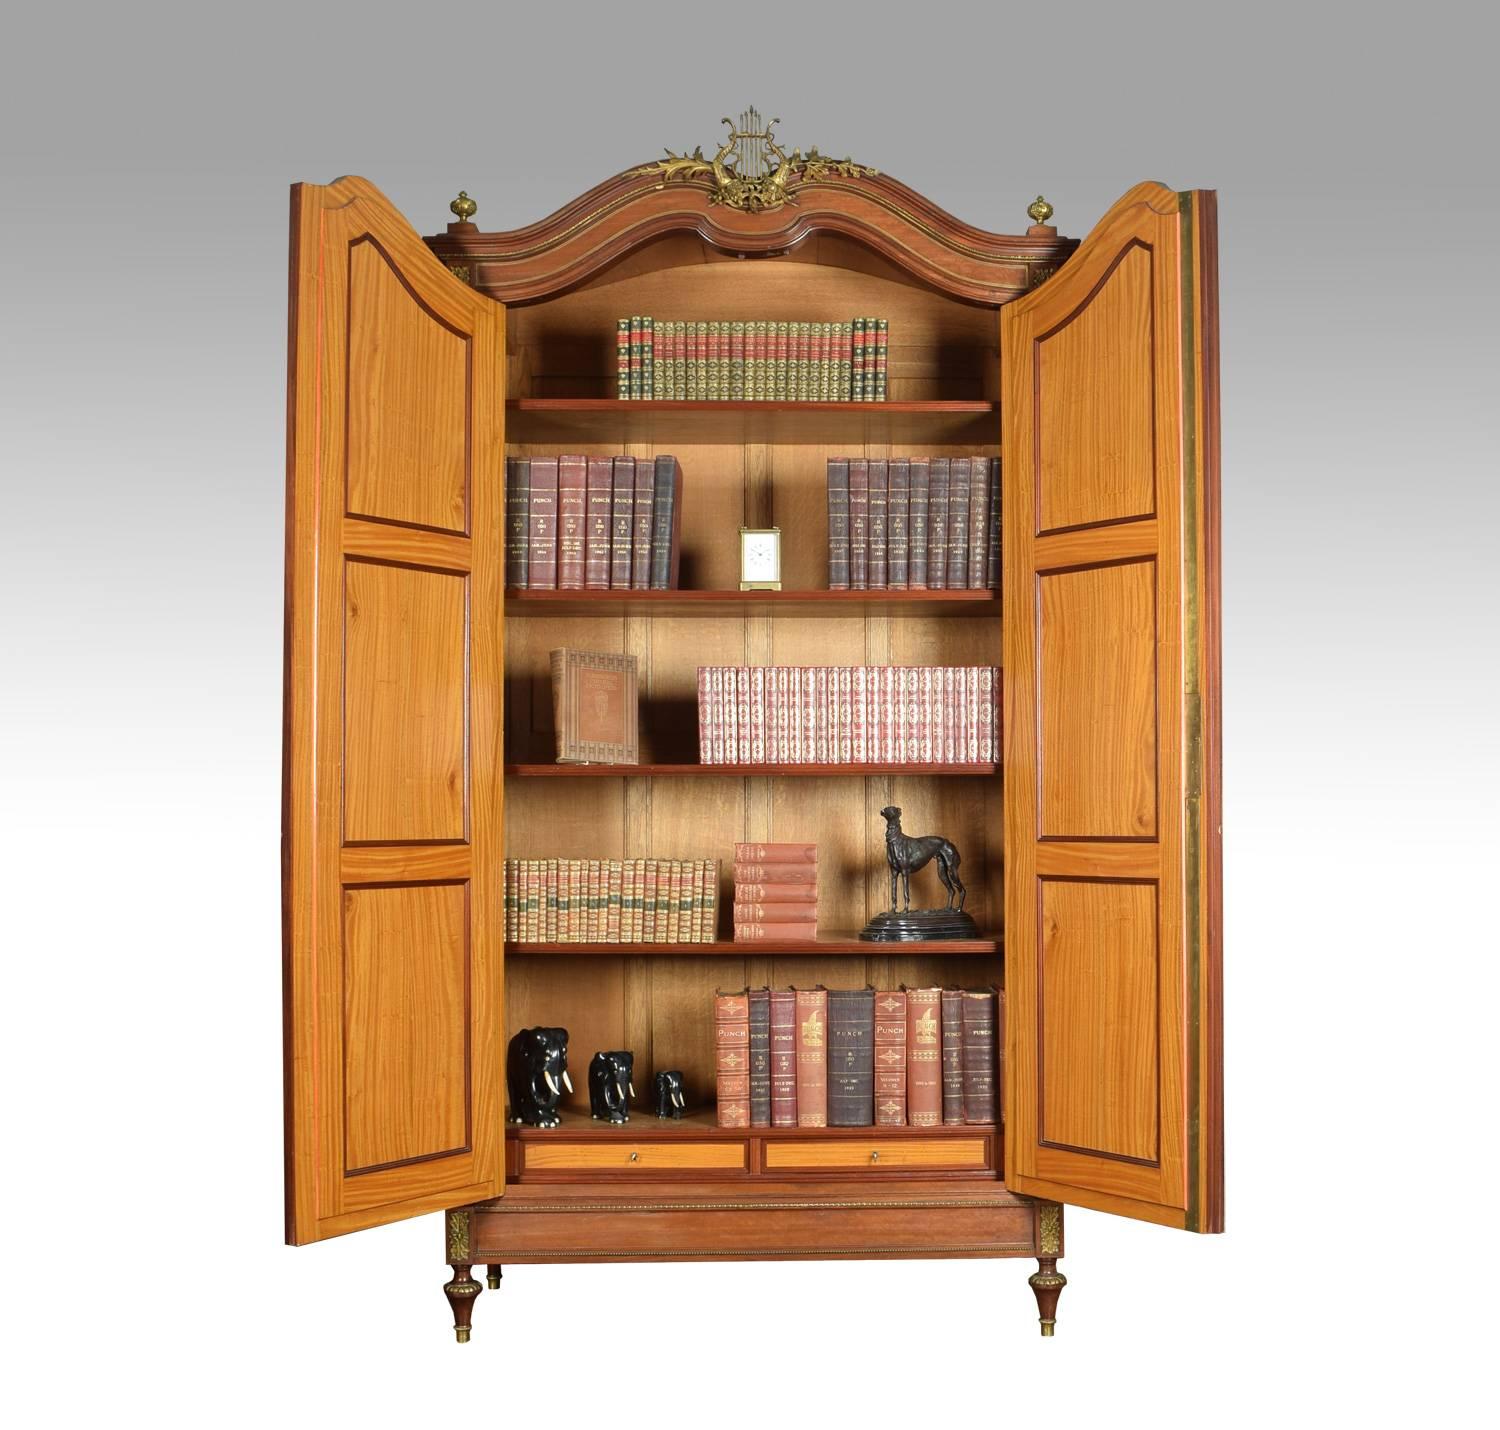 Late 19th century, French mahogany bibliotheque. The moulded cornice with central lyre motif above two large mirrored doors enclosing four adjustable shelves with two short draws below. All raised up on tapering brass caped feet. The bibliotheque